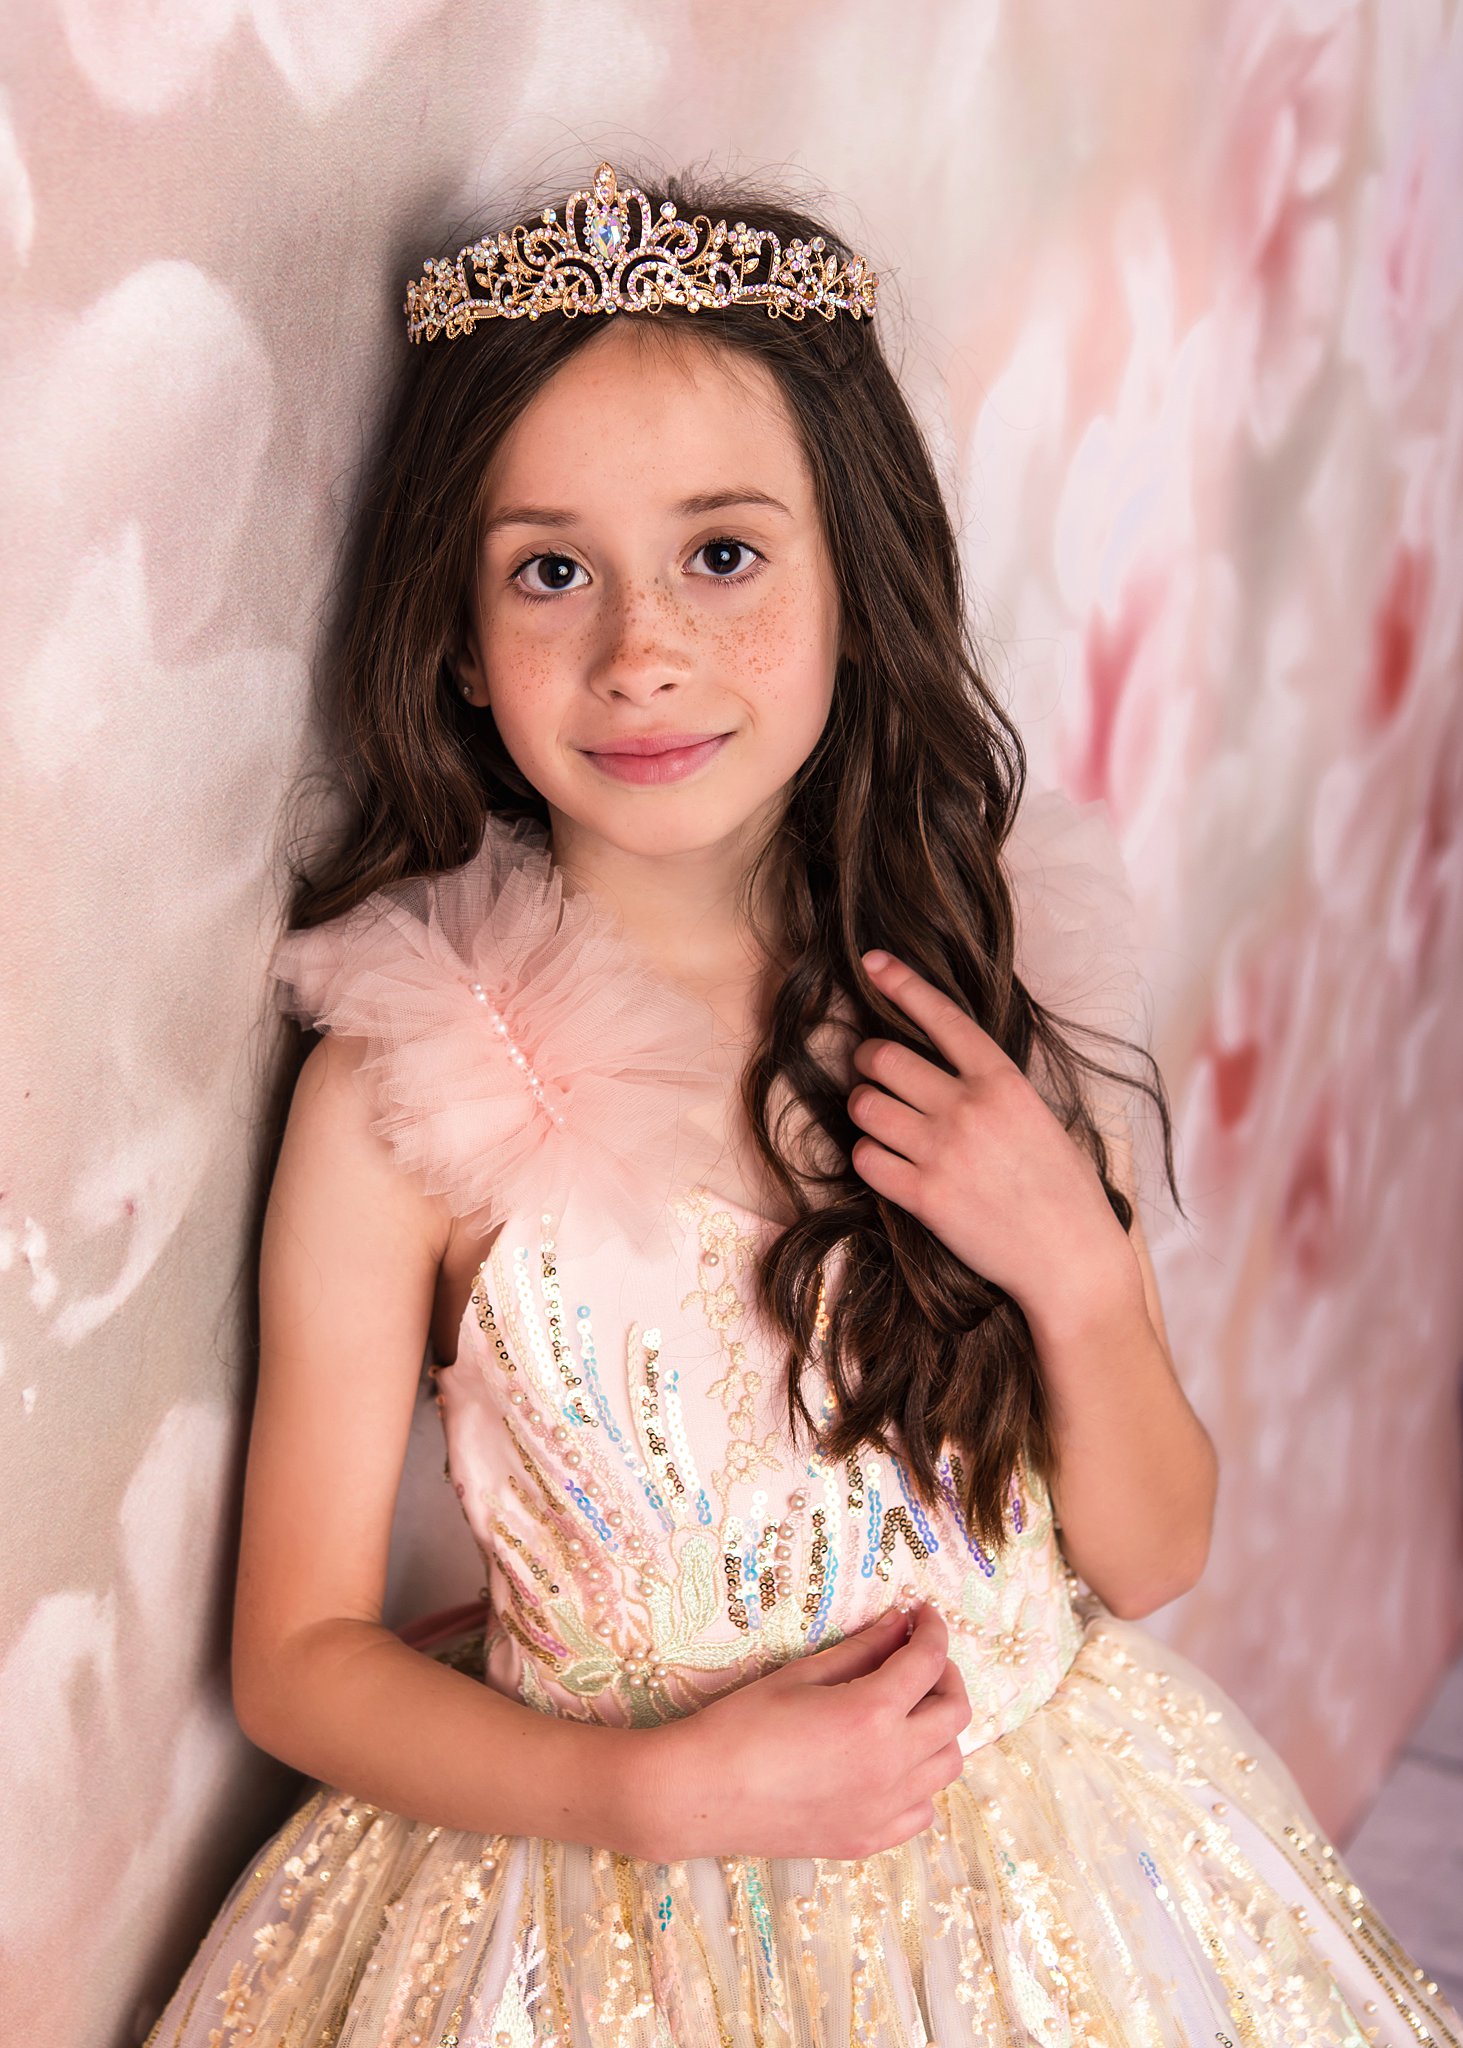 A young girl in a golden princess gown and crown leans against a wall in a studio